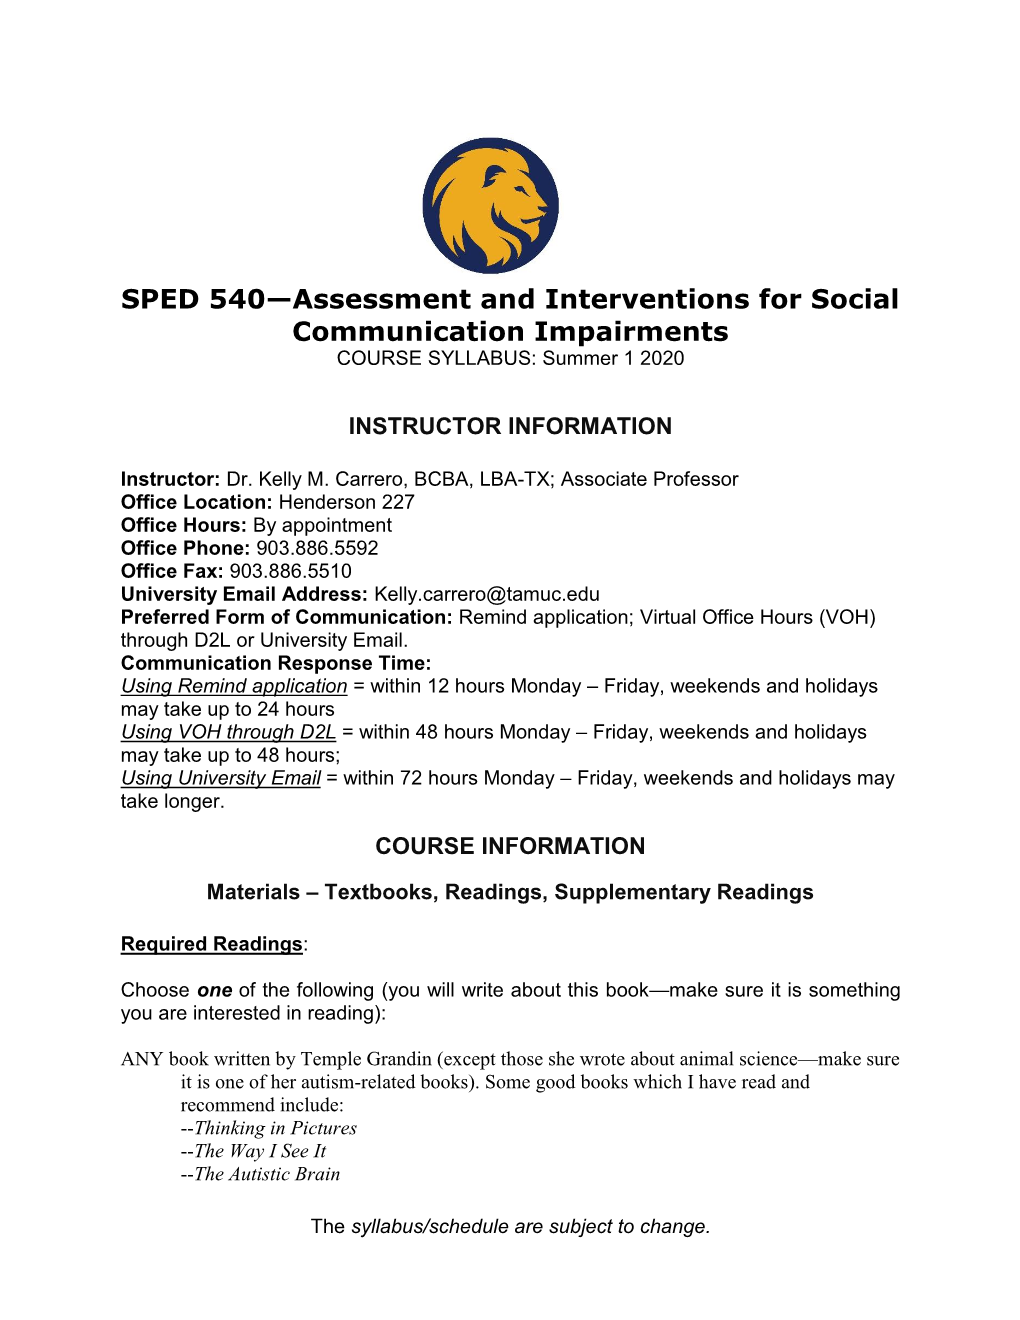 SPED 540—Assessment and Interventions for Social Communication Impairments COURSE SYLLABUS: Summer 1 2020